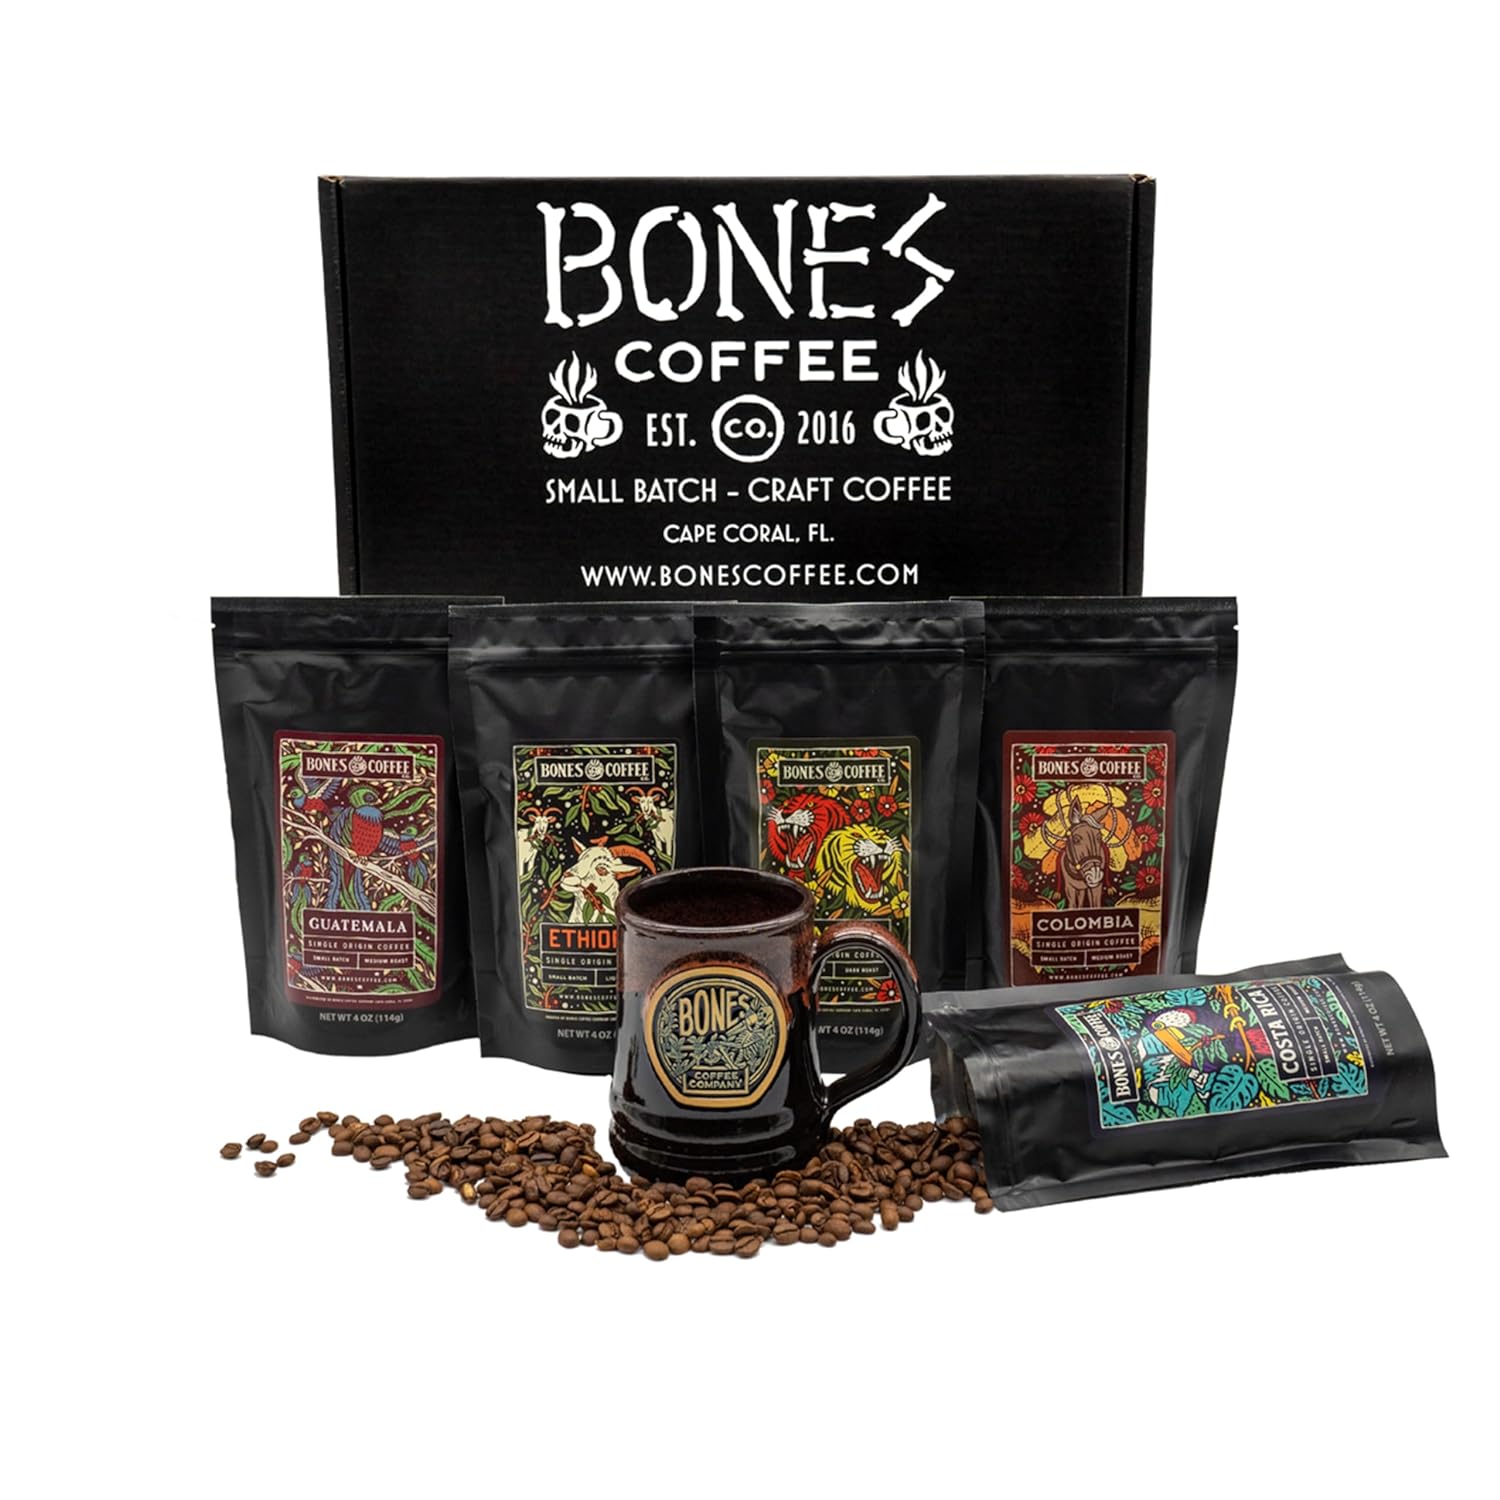 Bones Coffee Company NEW World Tour Bundle Whole Coffee Beans | Gift Box Set With Specialty Coffee Mug | 4 oz Pack of 5 Assorted Single-Origin Medium Roast Coffee Beverages (Whole Bean)